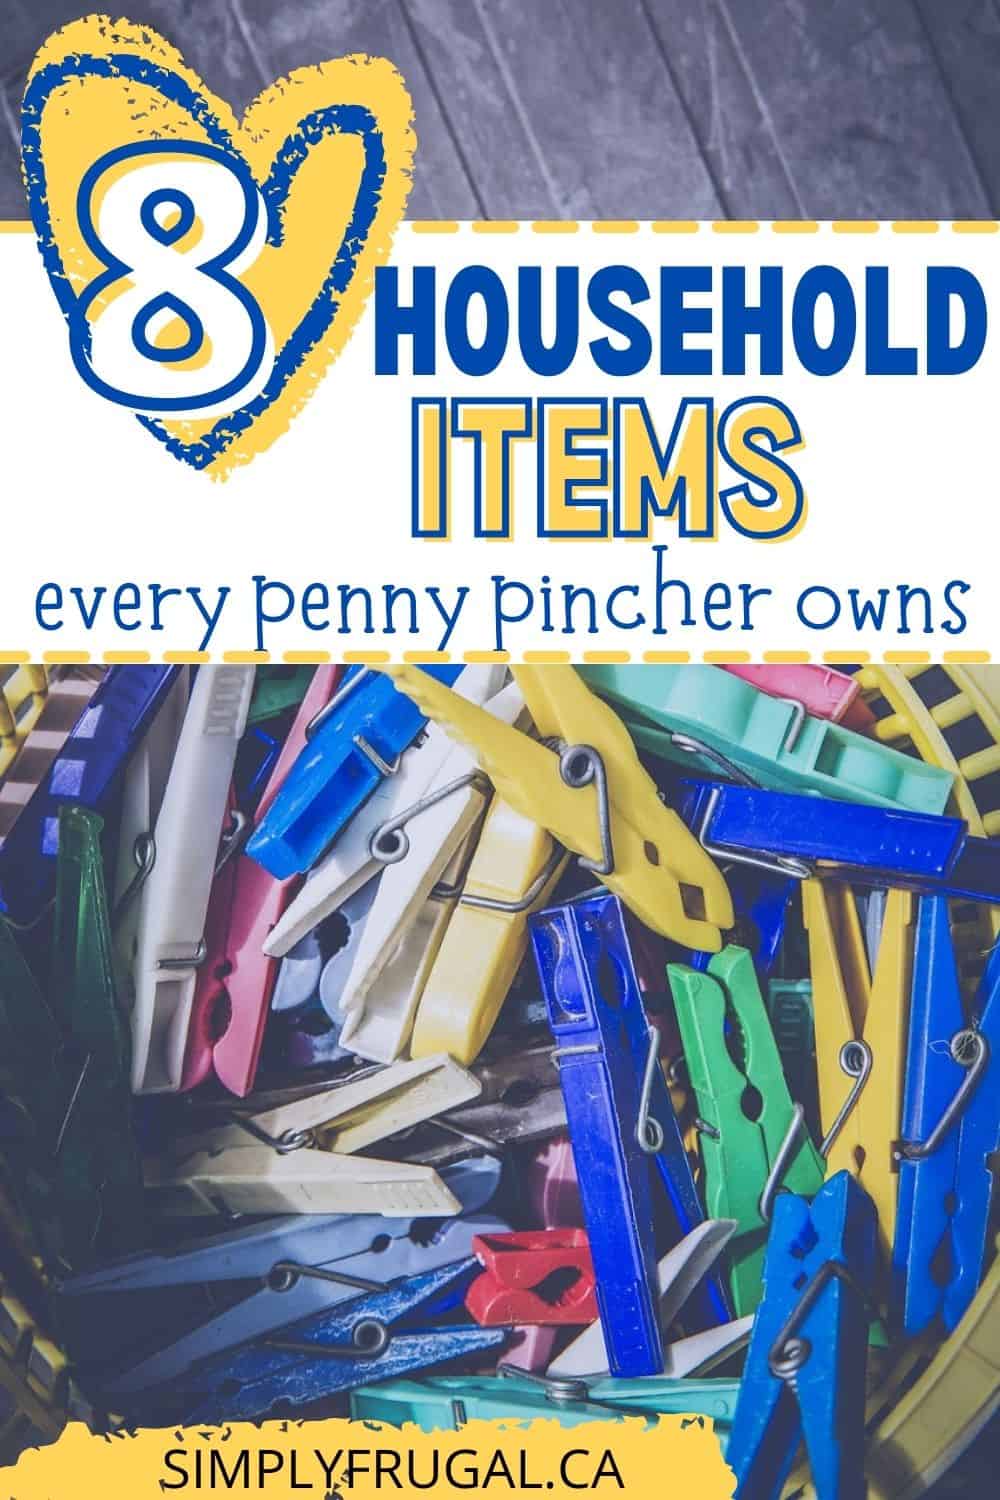 Household items that every penny pincher owns